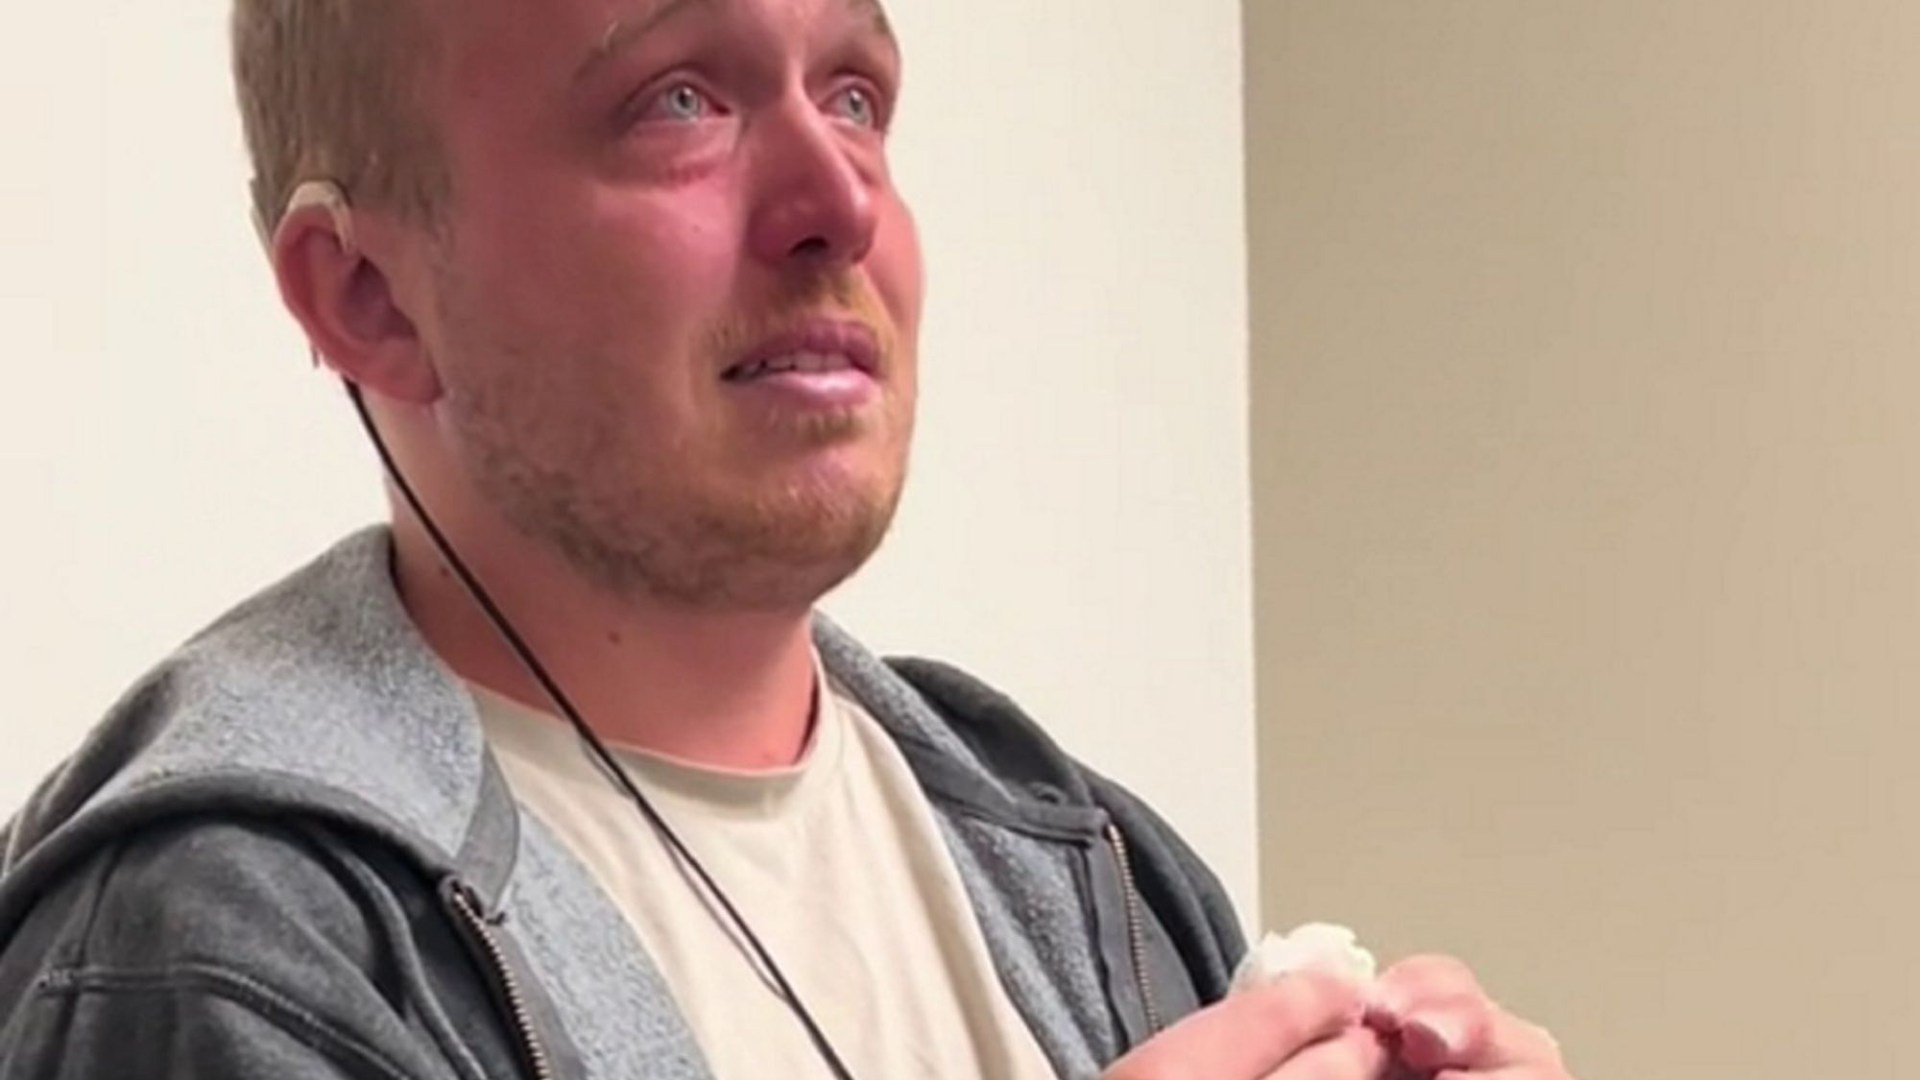 Heartwarming moment man, 28, hears for the first time and bursts into tears – after common bug rendered him deaf [Video]